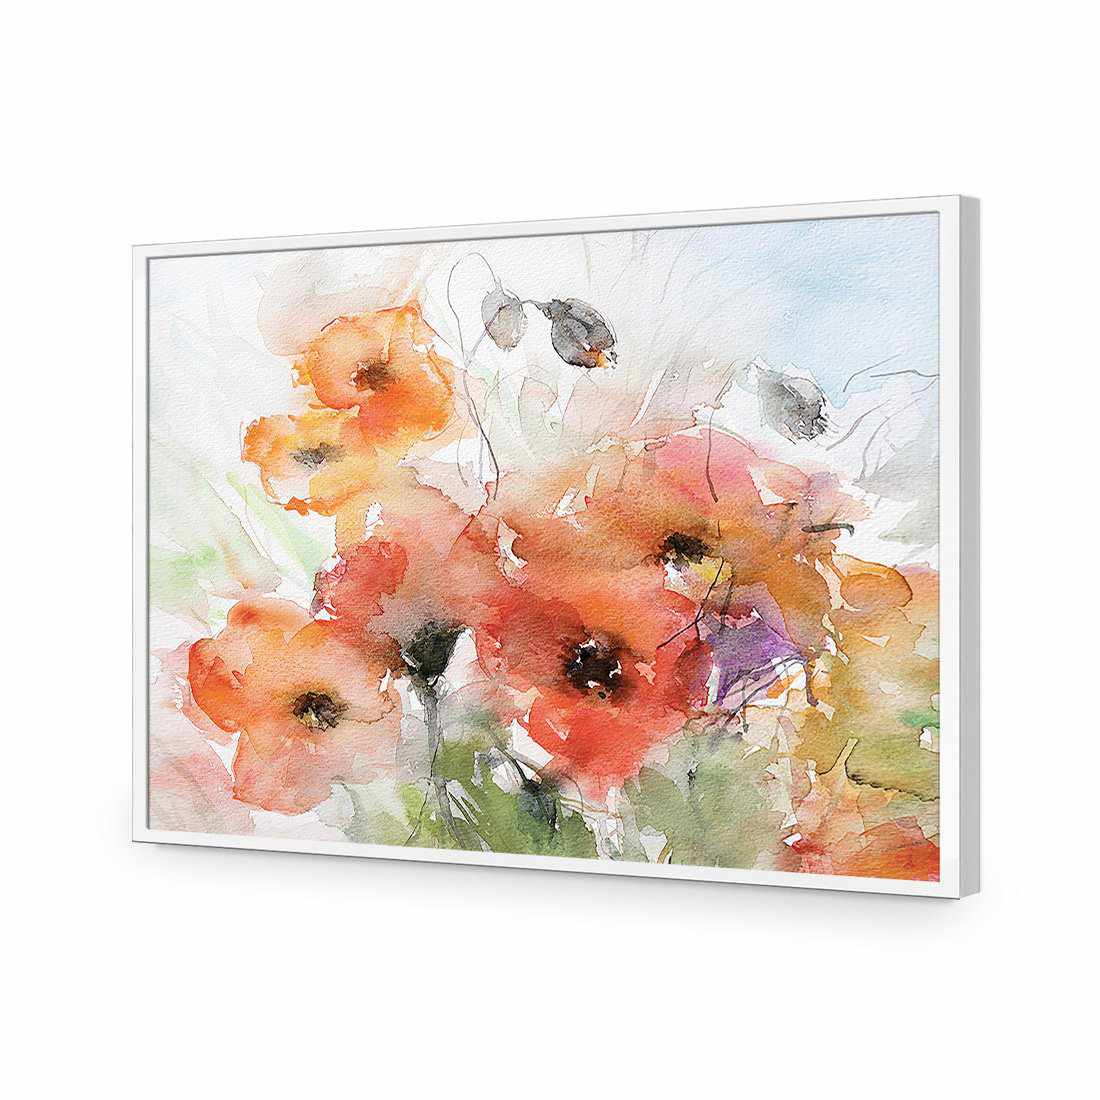 Watercolour Poppies-Acrylic-Wall Art Design-Without Border-Acrylic - White Frame-45x30cm-Wall Art Designs